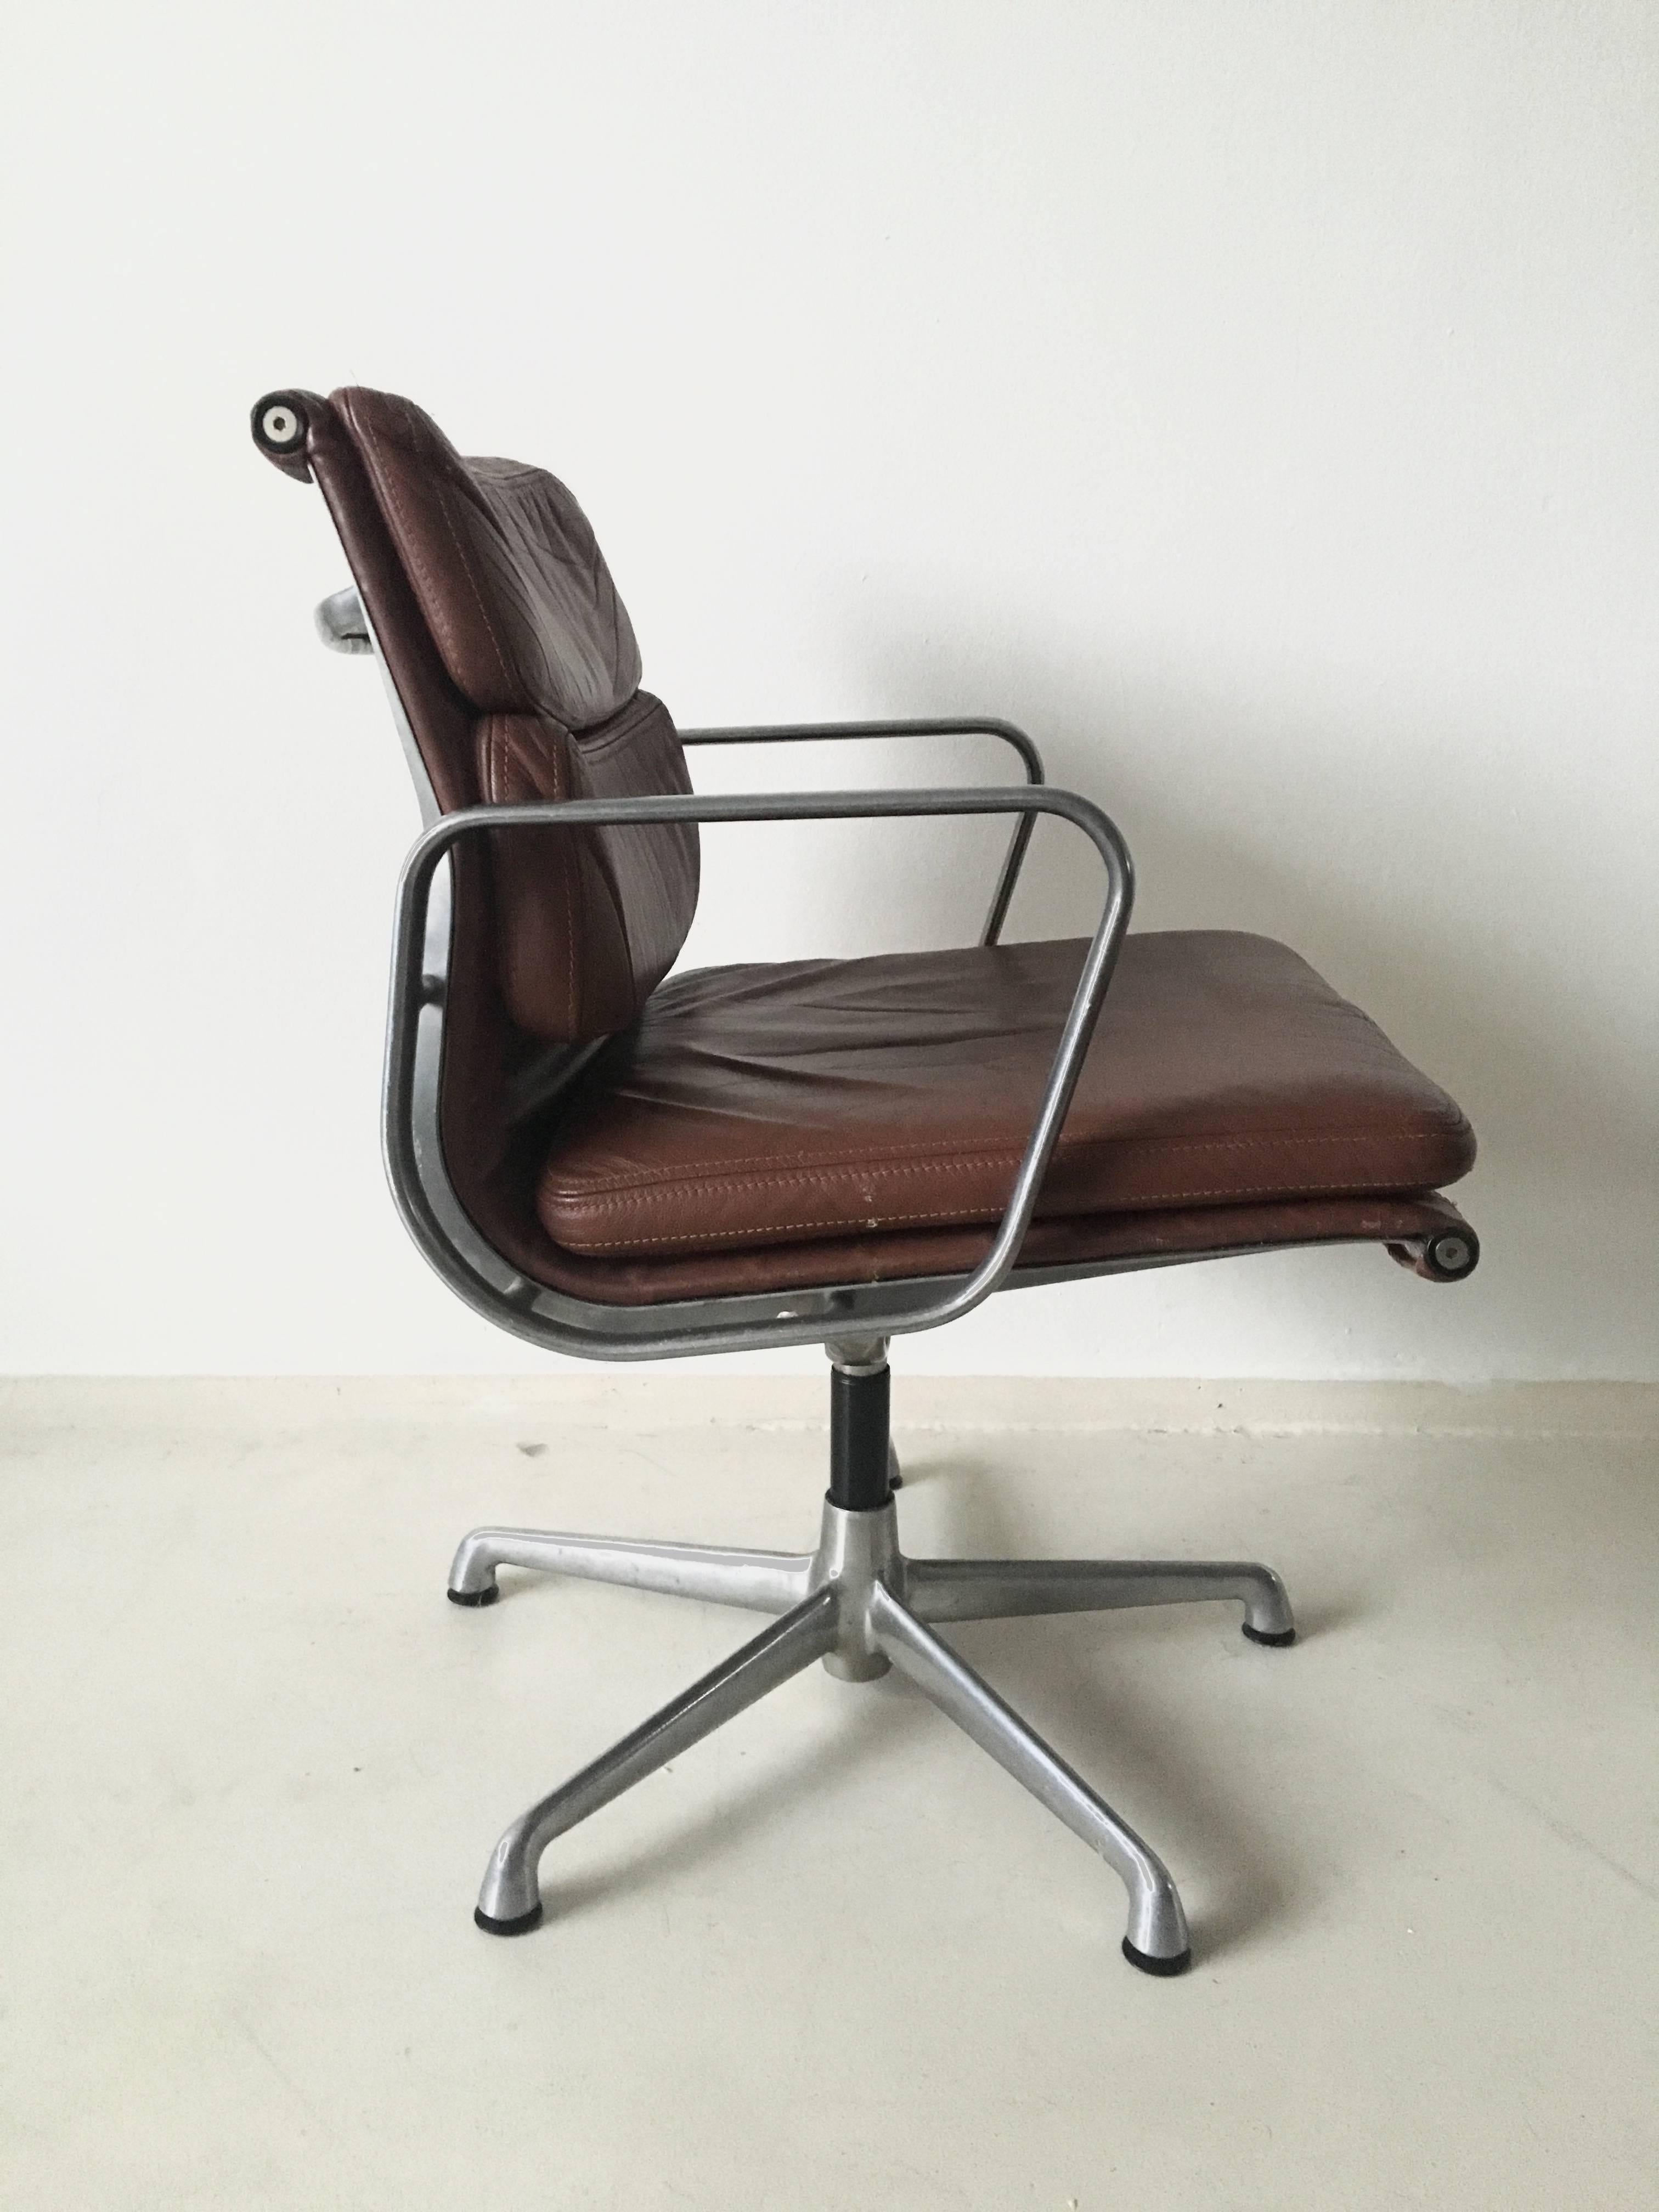 Mid-20th Century Charles Eames Soft Pad Chairs EA208, for ICF Italy, 1960s (ONLY 1 LEFT)